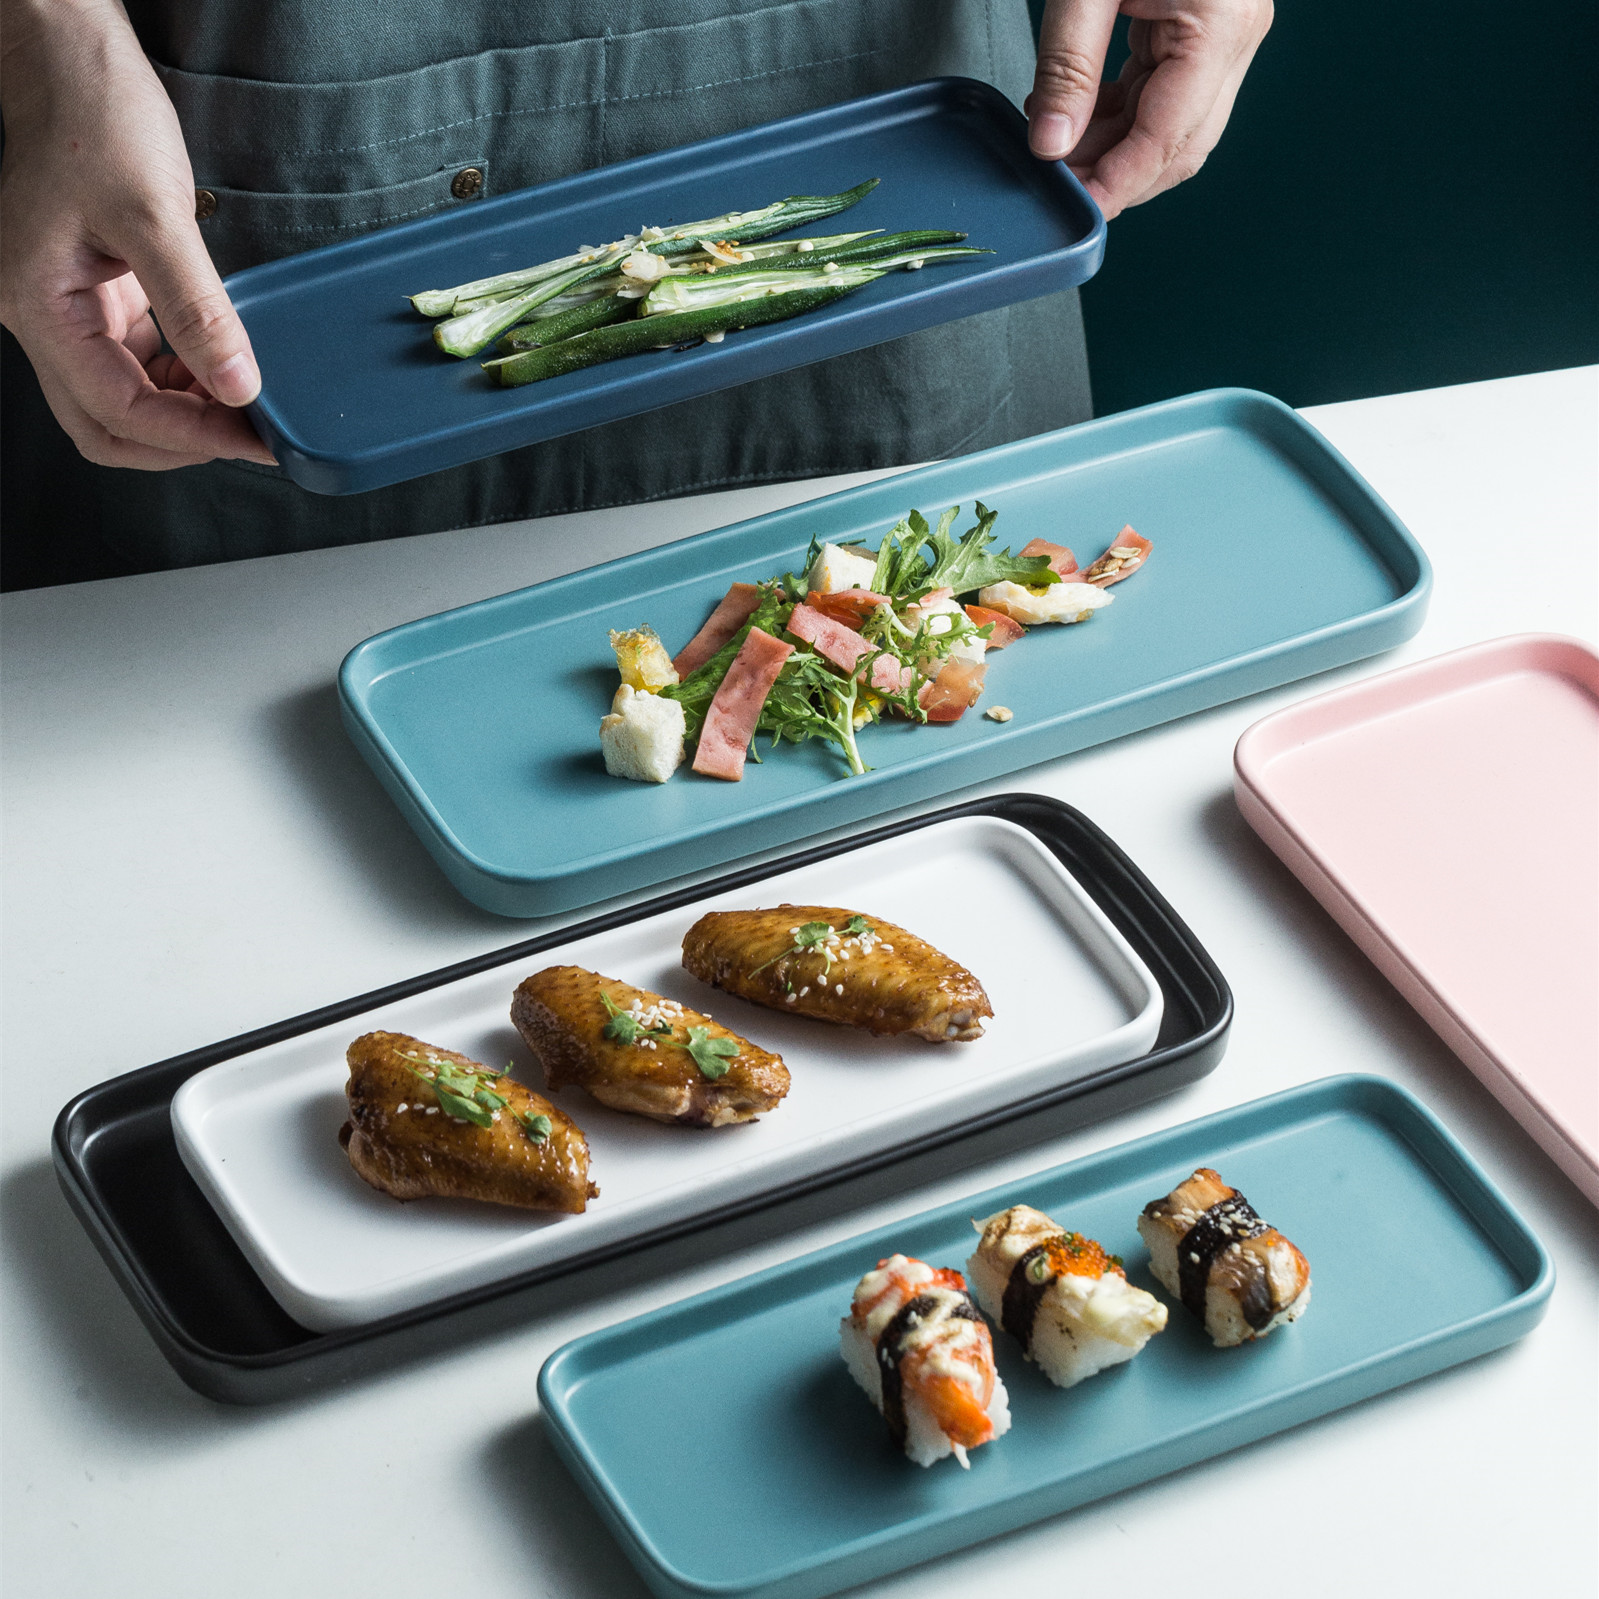 Strip plate household ceramic plate Nordic sushi snack food dish food dish square plates dish fastfood tableware